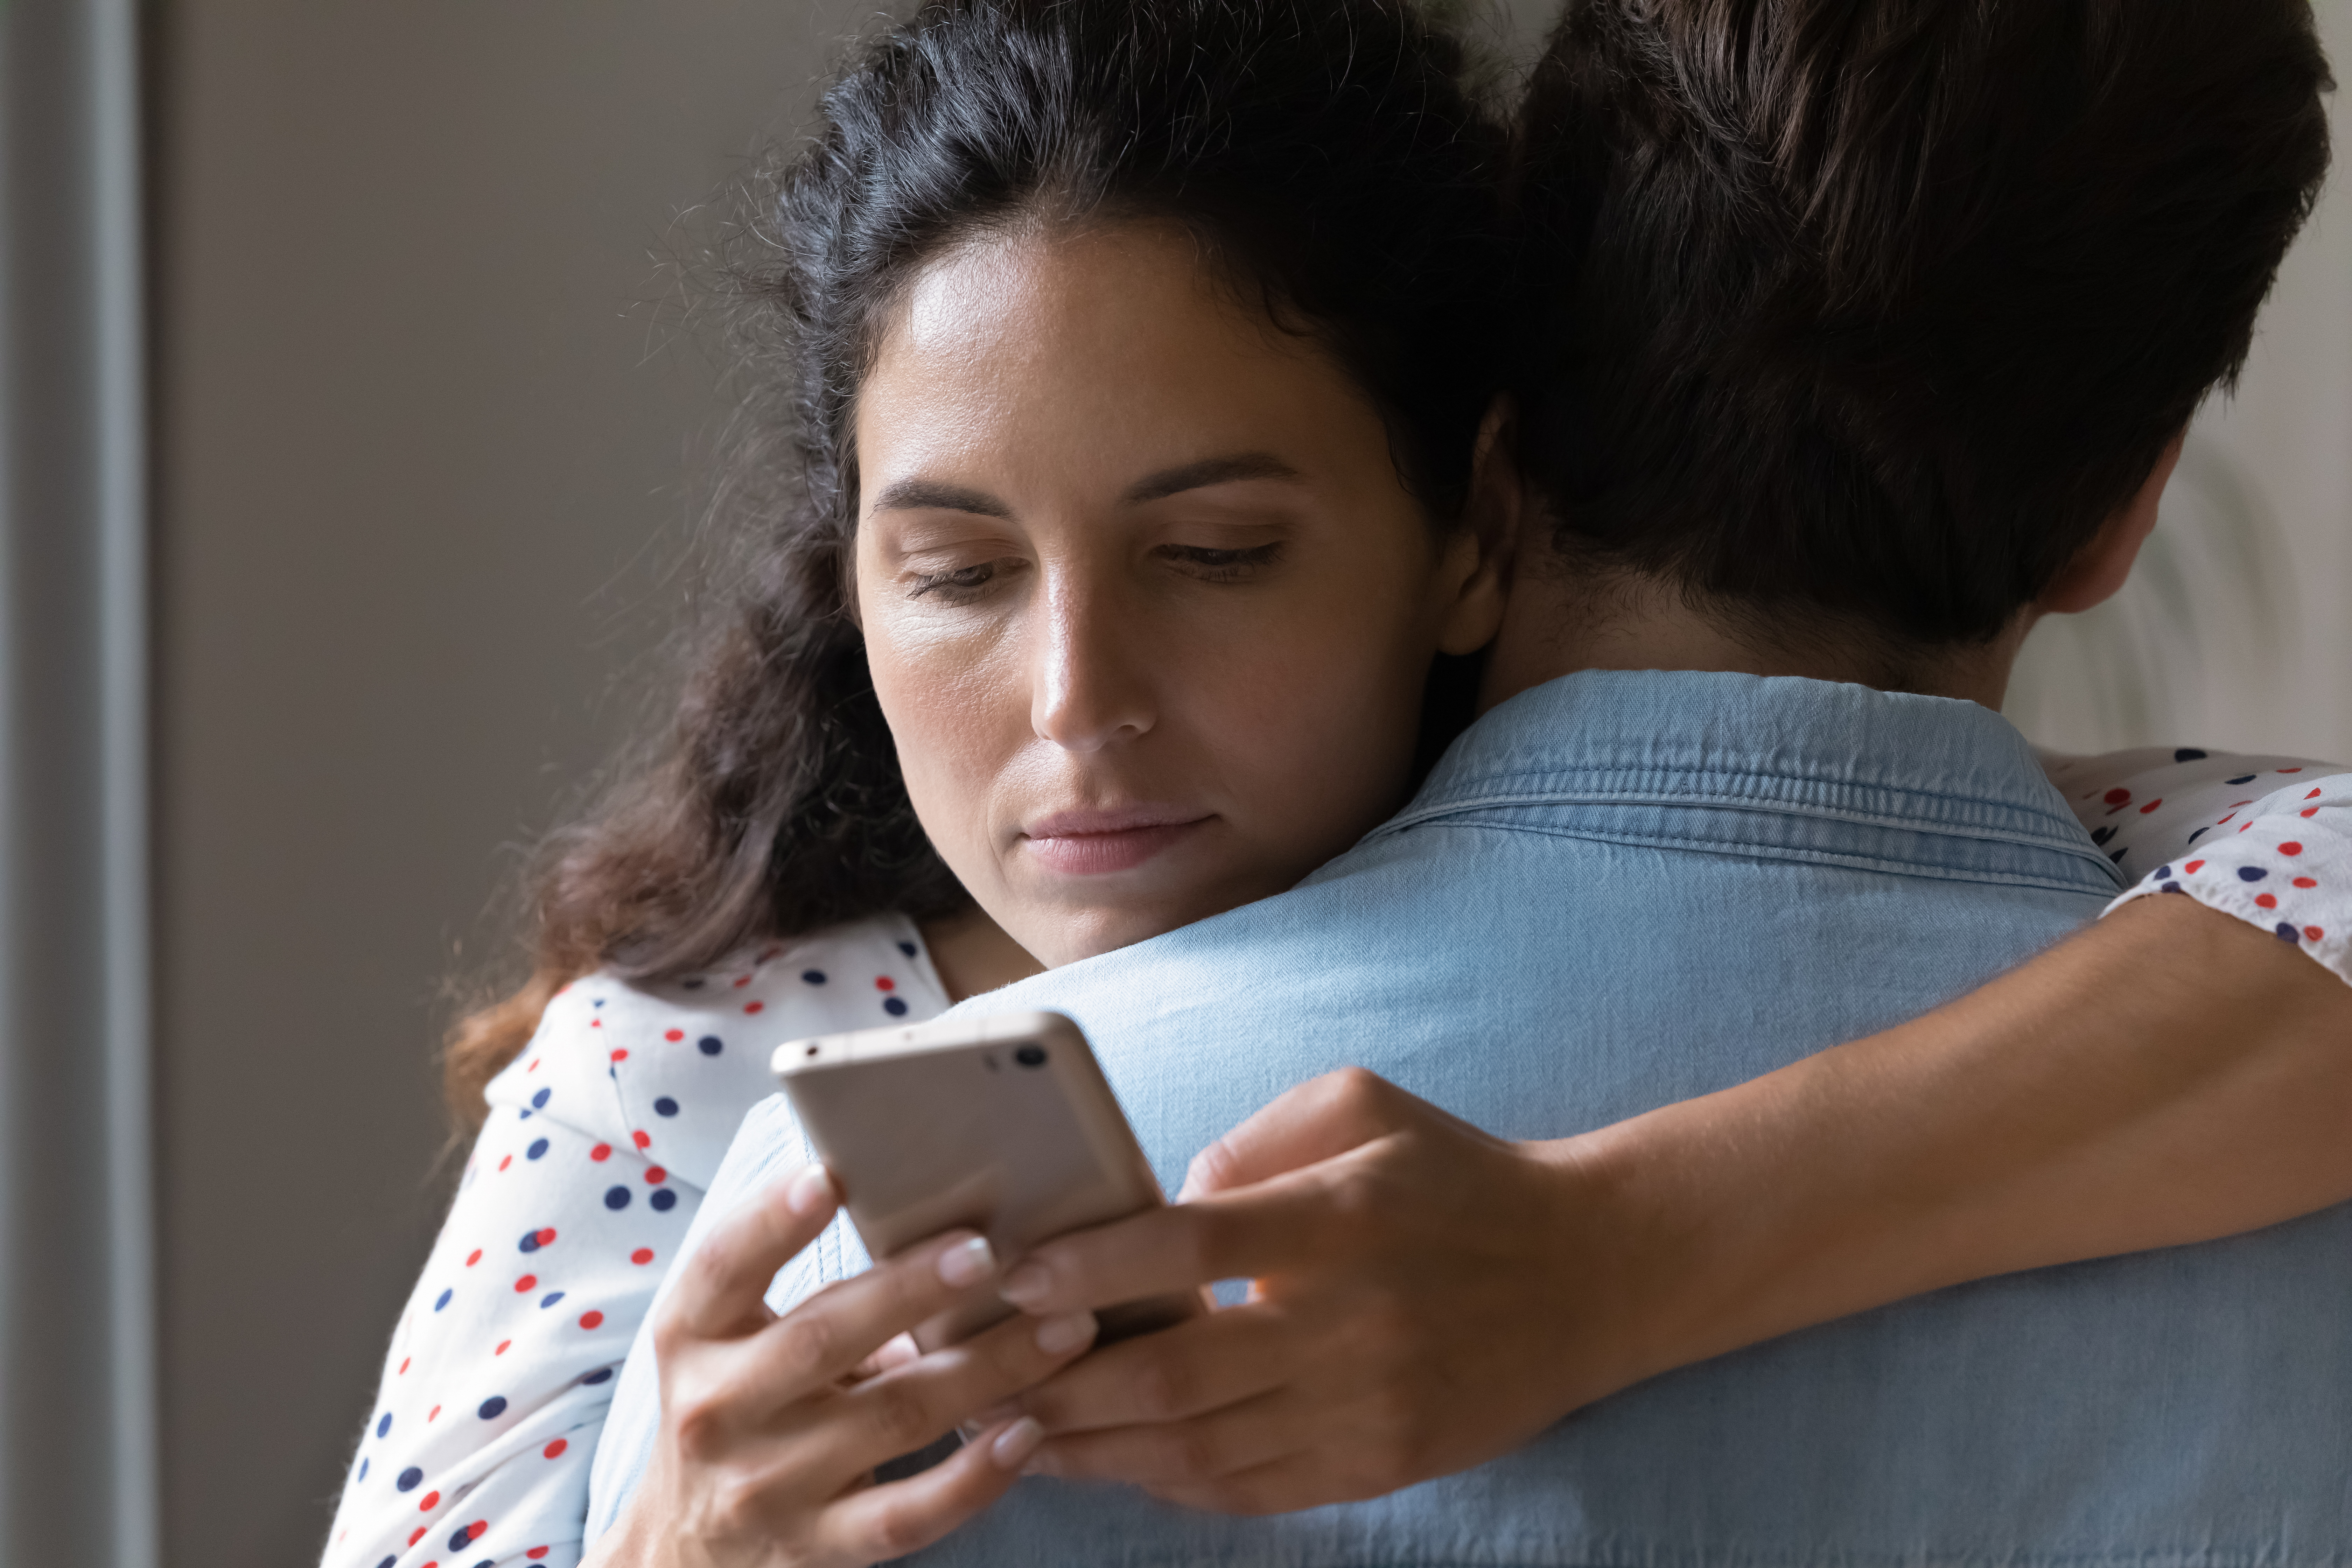 A man and a woman hugging while she looks at her phone | Source: Shutterstock